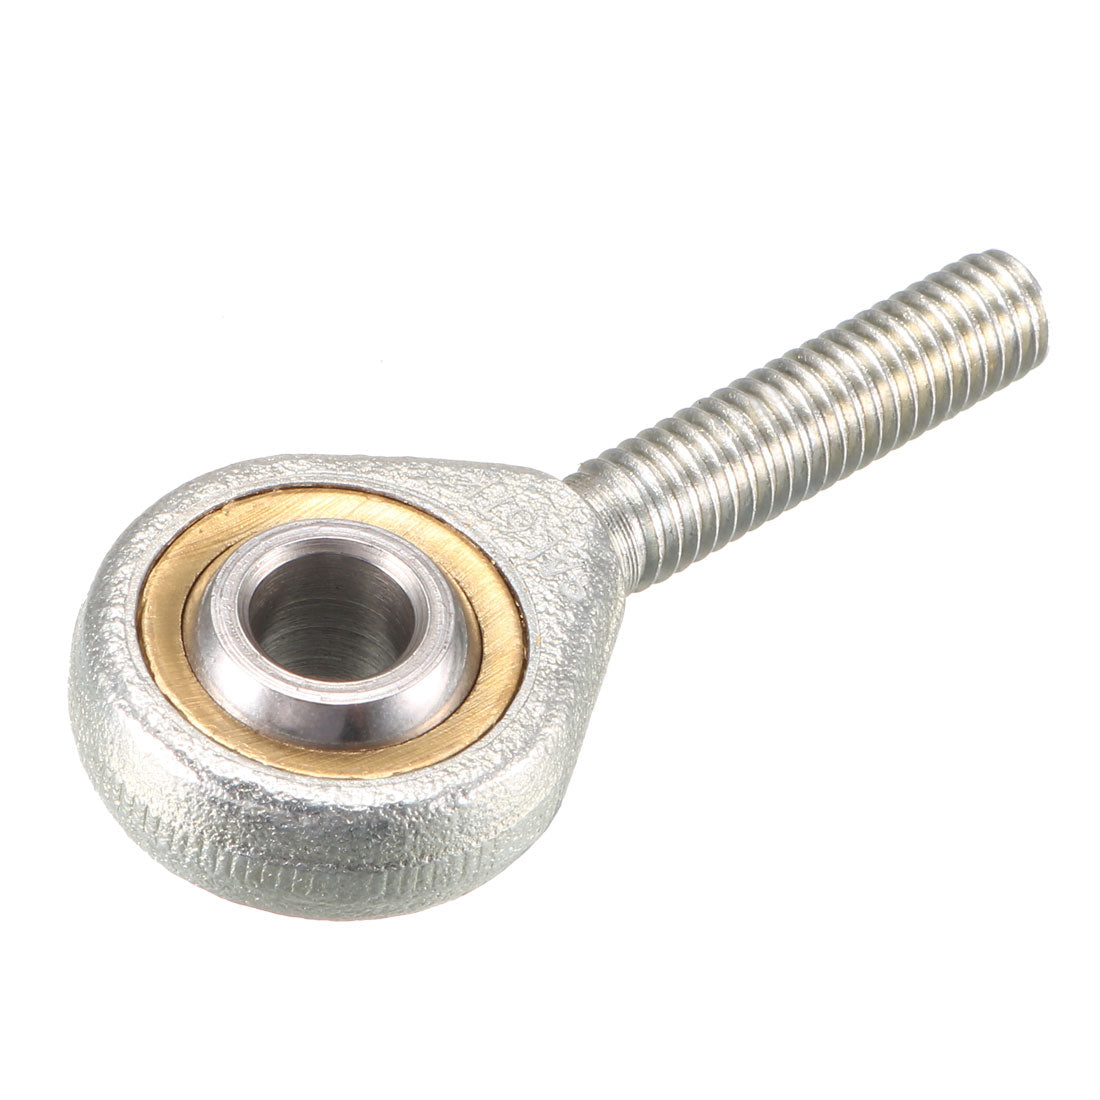 uxcell Uxcell 6mm Rod End Bearing M6x1.0mm Rod Ends Ball Joint Male Left Hand Thread